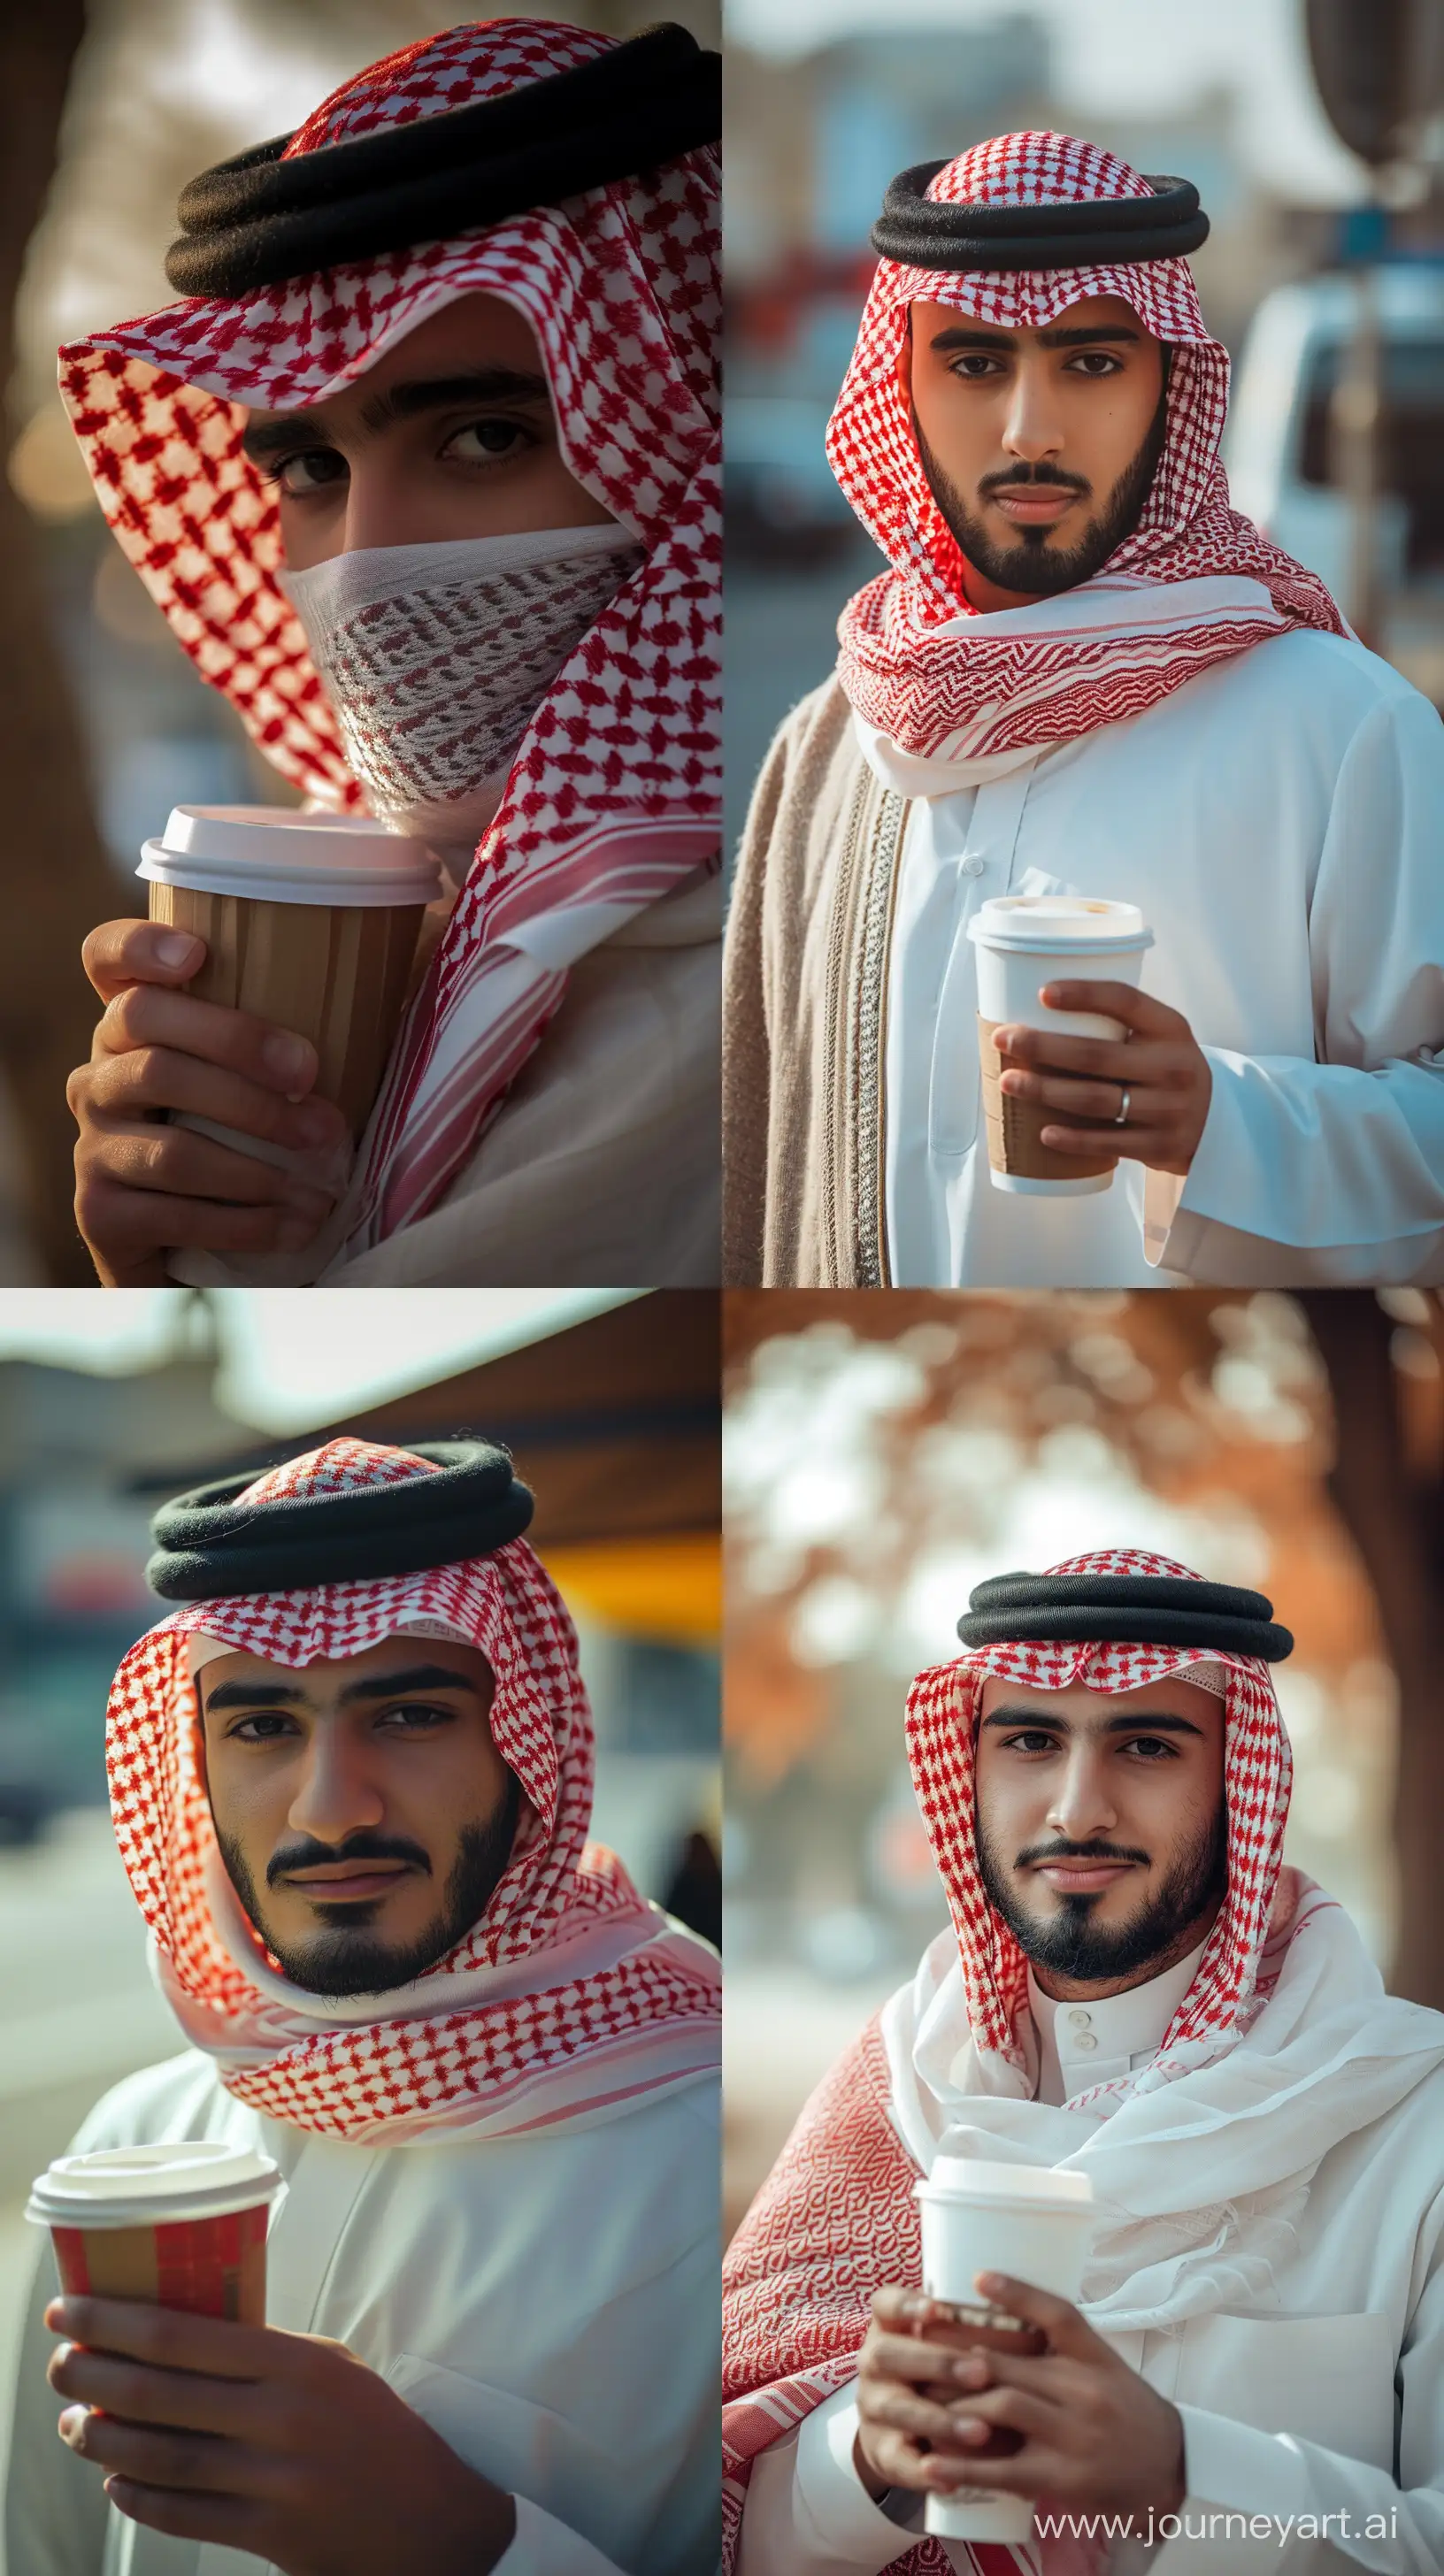 cinematic portrait for a Saudi young man wearing white thobe and red, white shemagh drinking coffee in paper cup::3 cinematic portrait for a Saudi young man wearing white thobe and red, white shemagh drinking coffee. sun light reflecting on his face like a sci-fi magic. tranquil shadow play leaks touching his face gently. vibrant surreal optical illusion background, candid face. in the style of imax film --ar 9:16 --v 6.0 --style raw